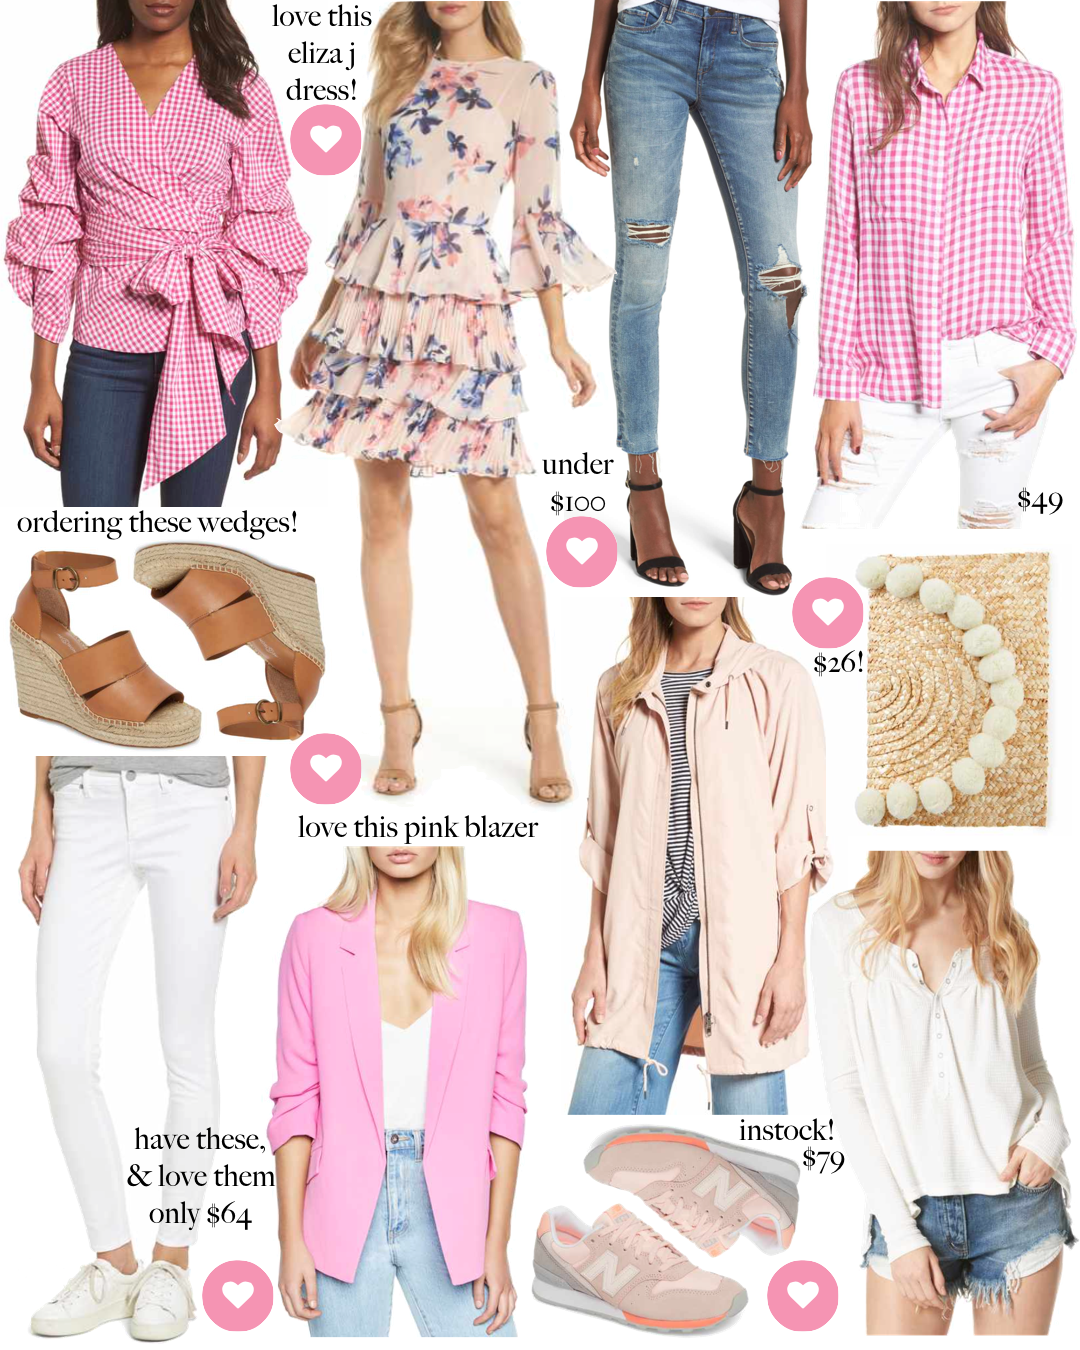 New Spring Arrivals In Our Cart - The Double Take Girls